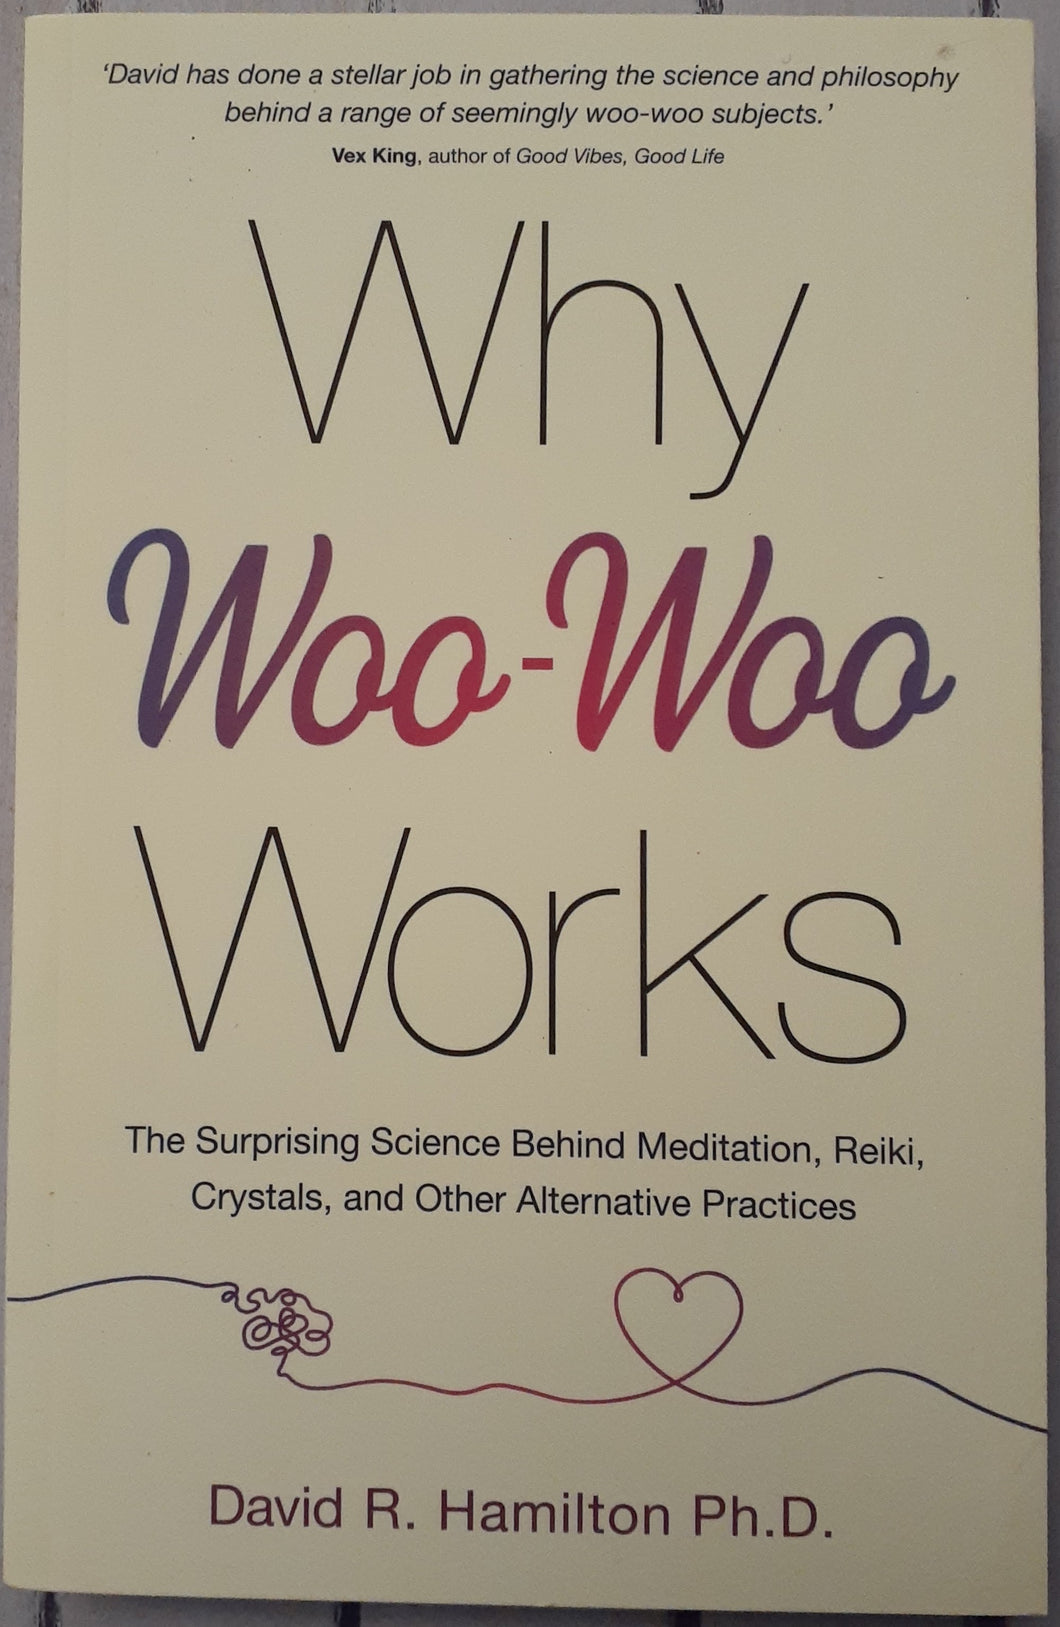 Why Woo-Woo Works: The Surprising Science Behind Meditation, Reiki, Crystals, and Other Alternative Practices